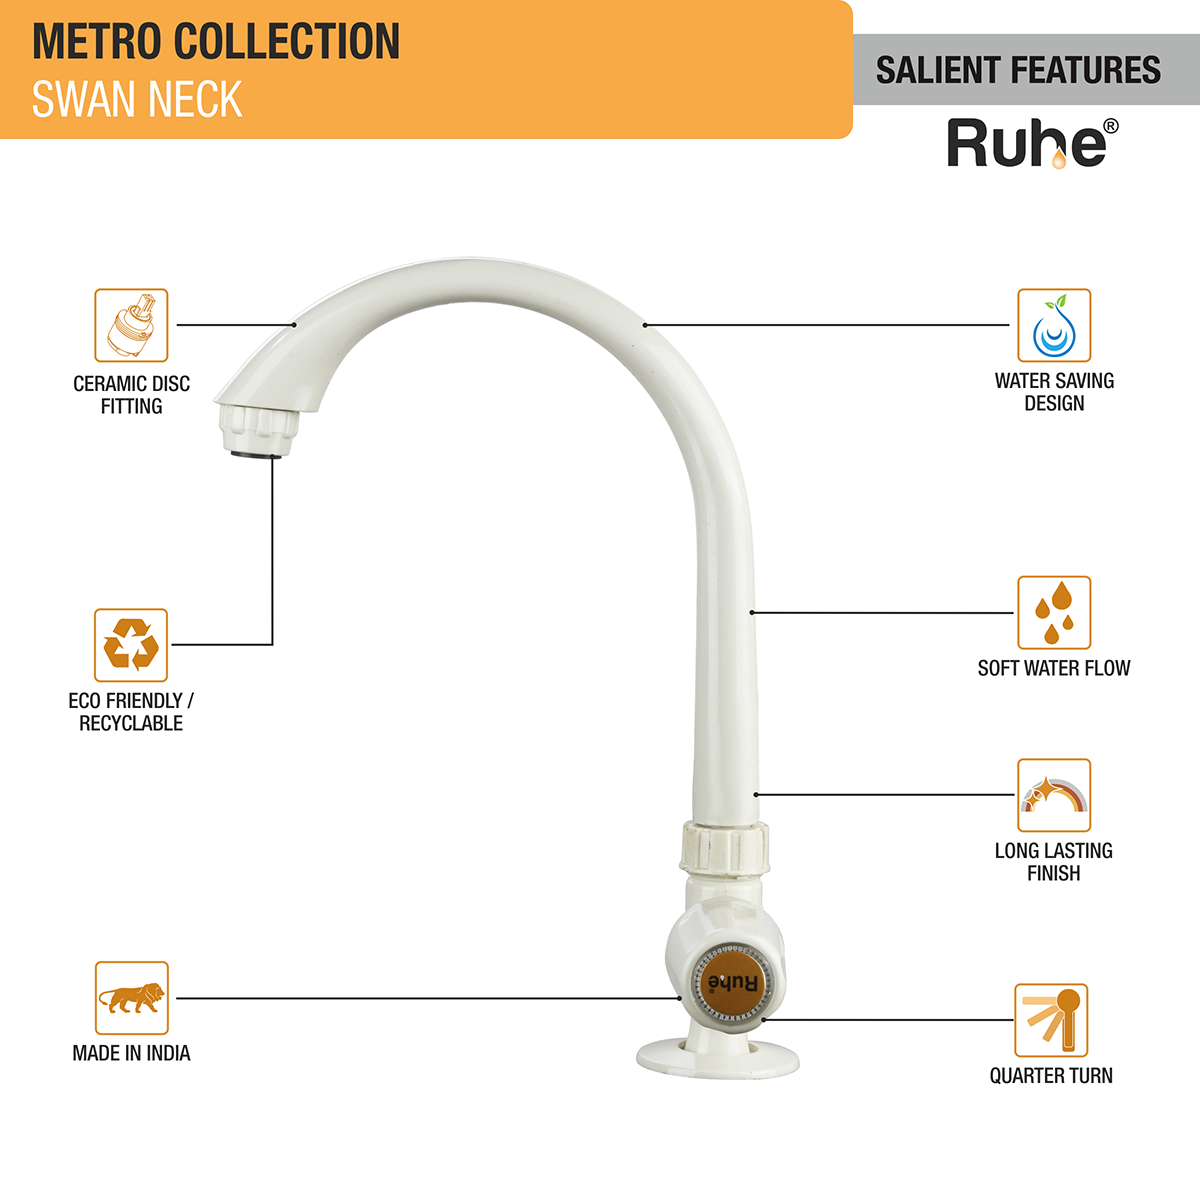 Metro PTMT Swan Neck with Swivel Spout Faucet features